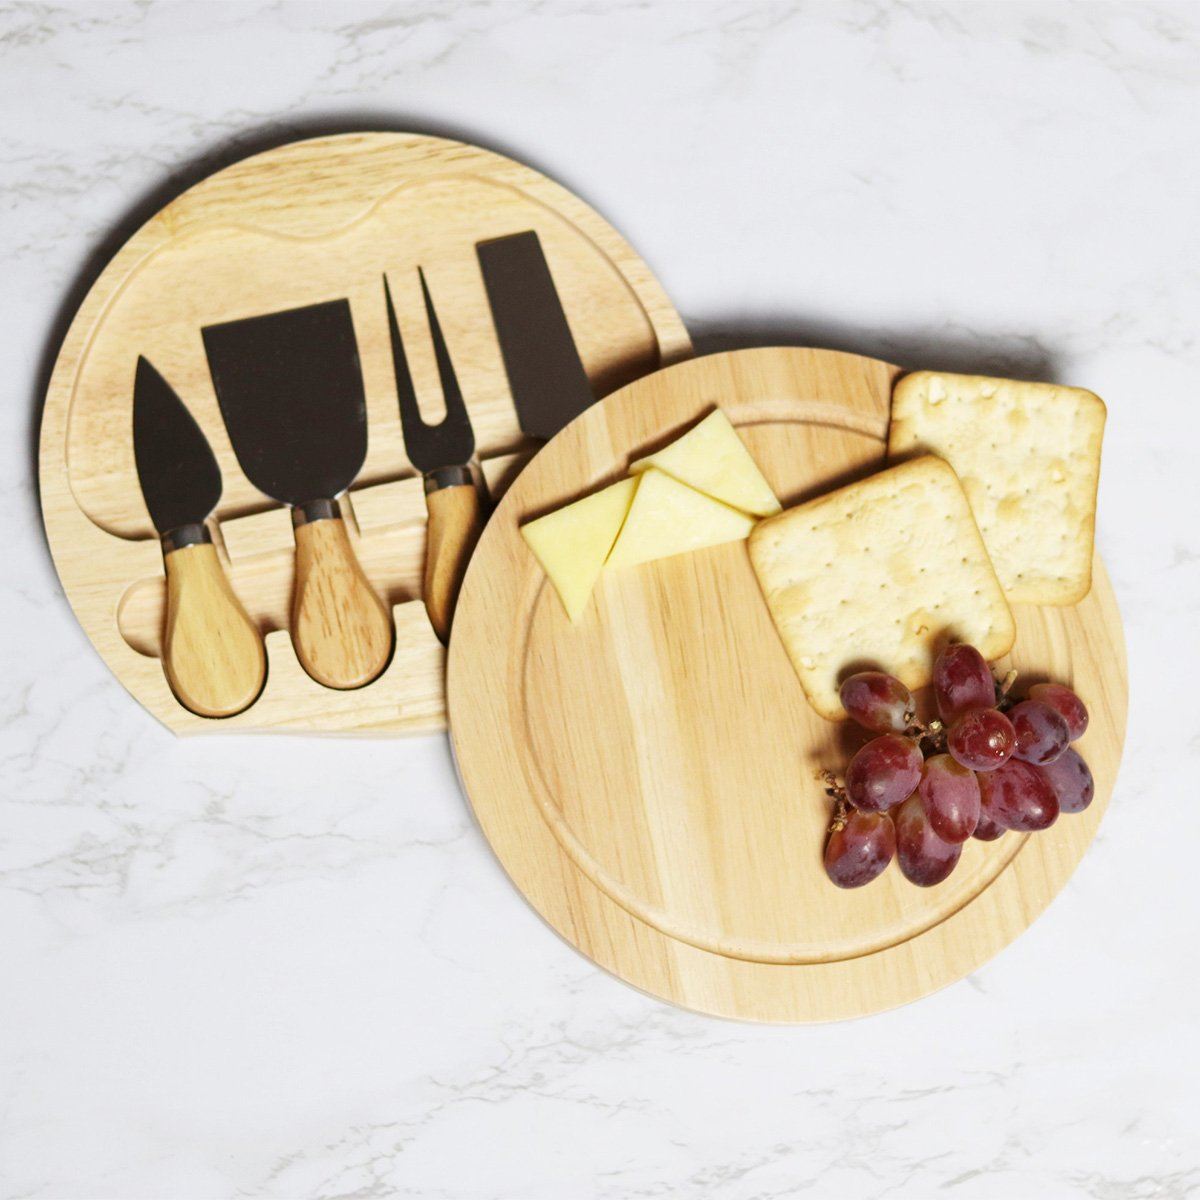 Cheese Board - Personalised Chopping Board - Chop On